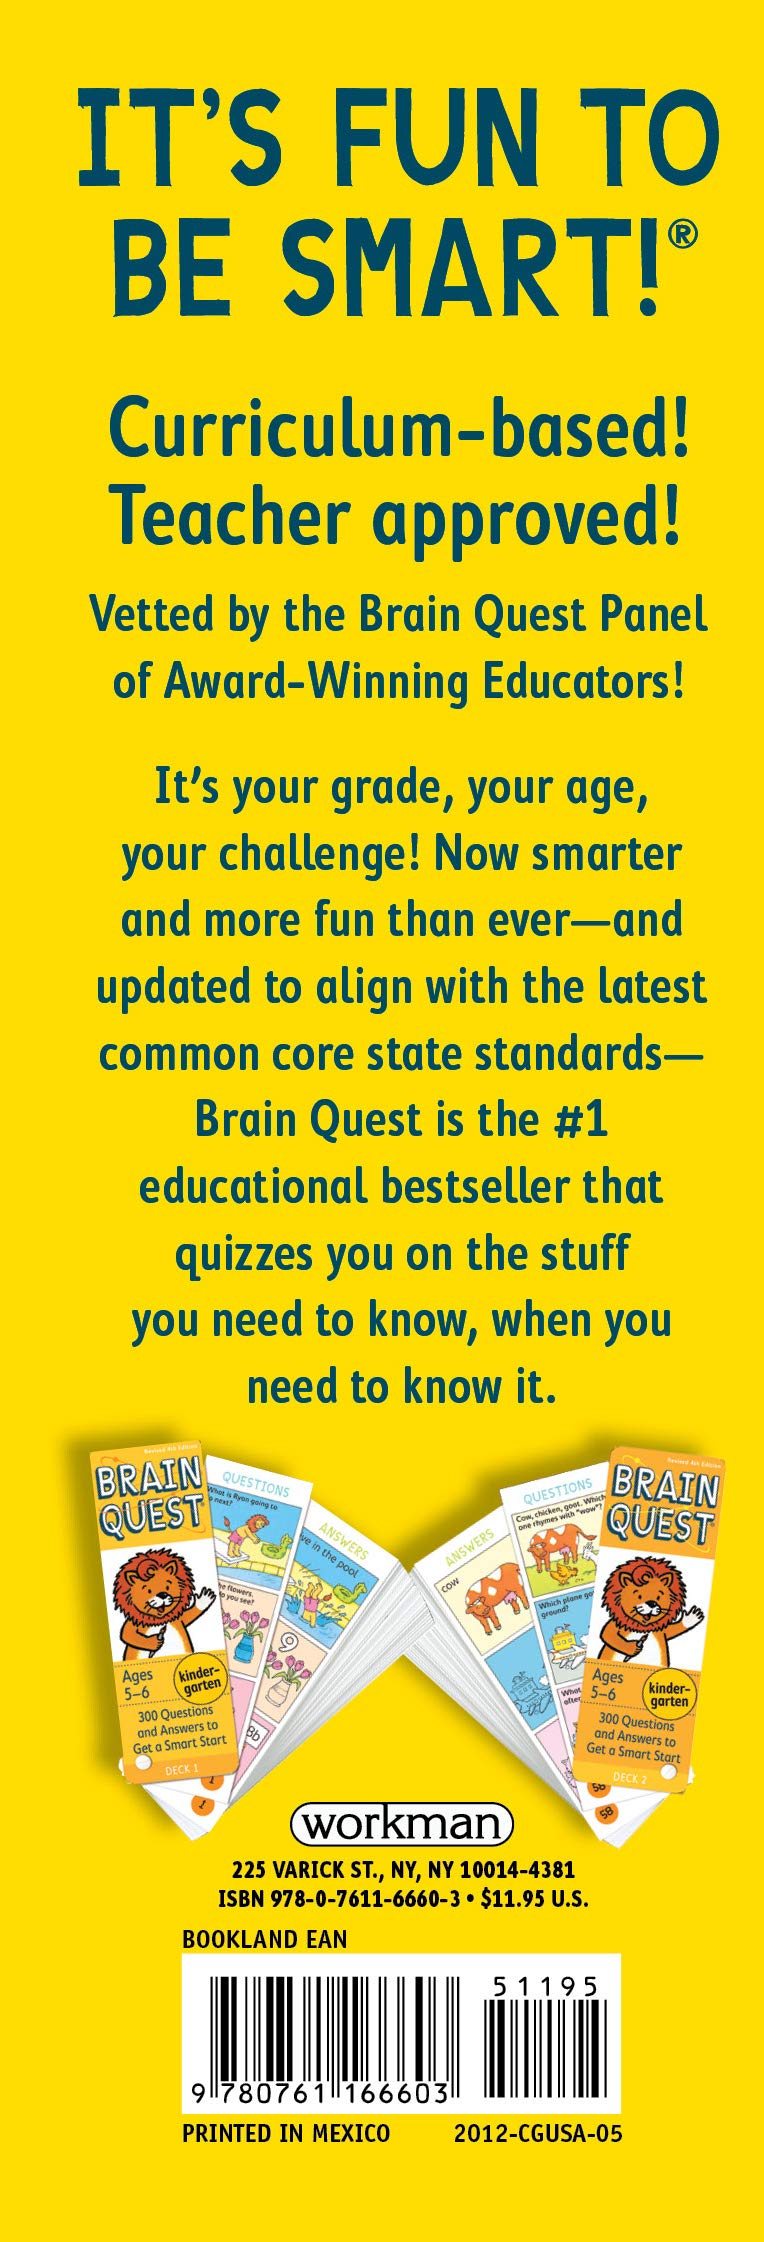 Brain Quest Kindergarten, Revised 4th Edition: 300 Questions and Answers to Get a Smart Start (Brain Quest Decks) - Workman Publishing - The English Bookshop